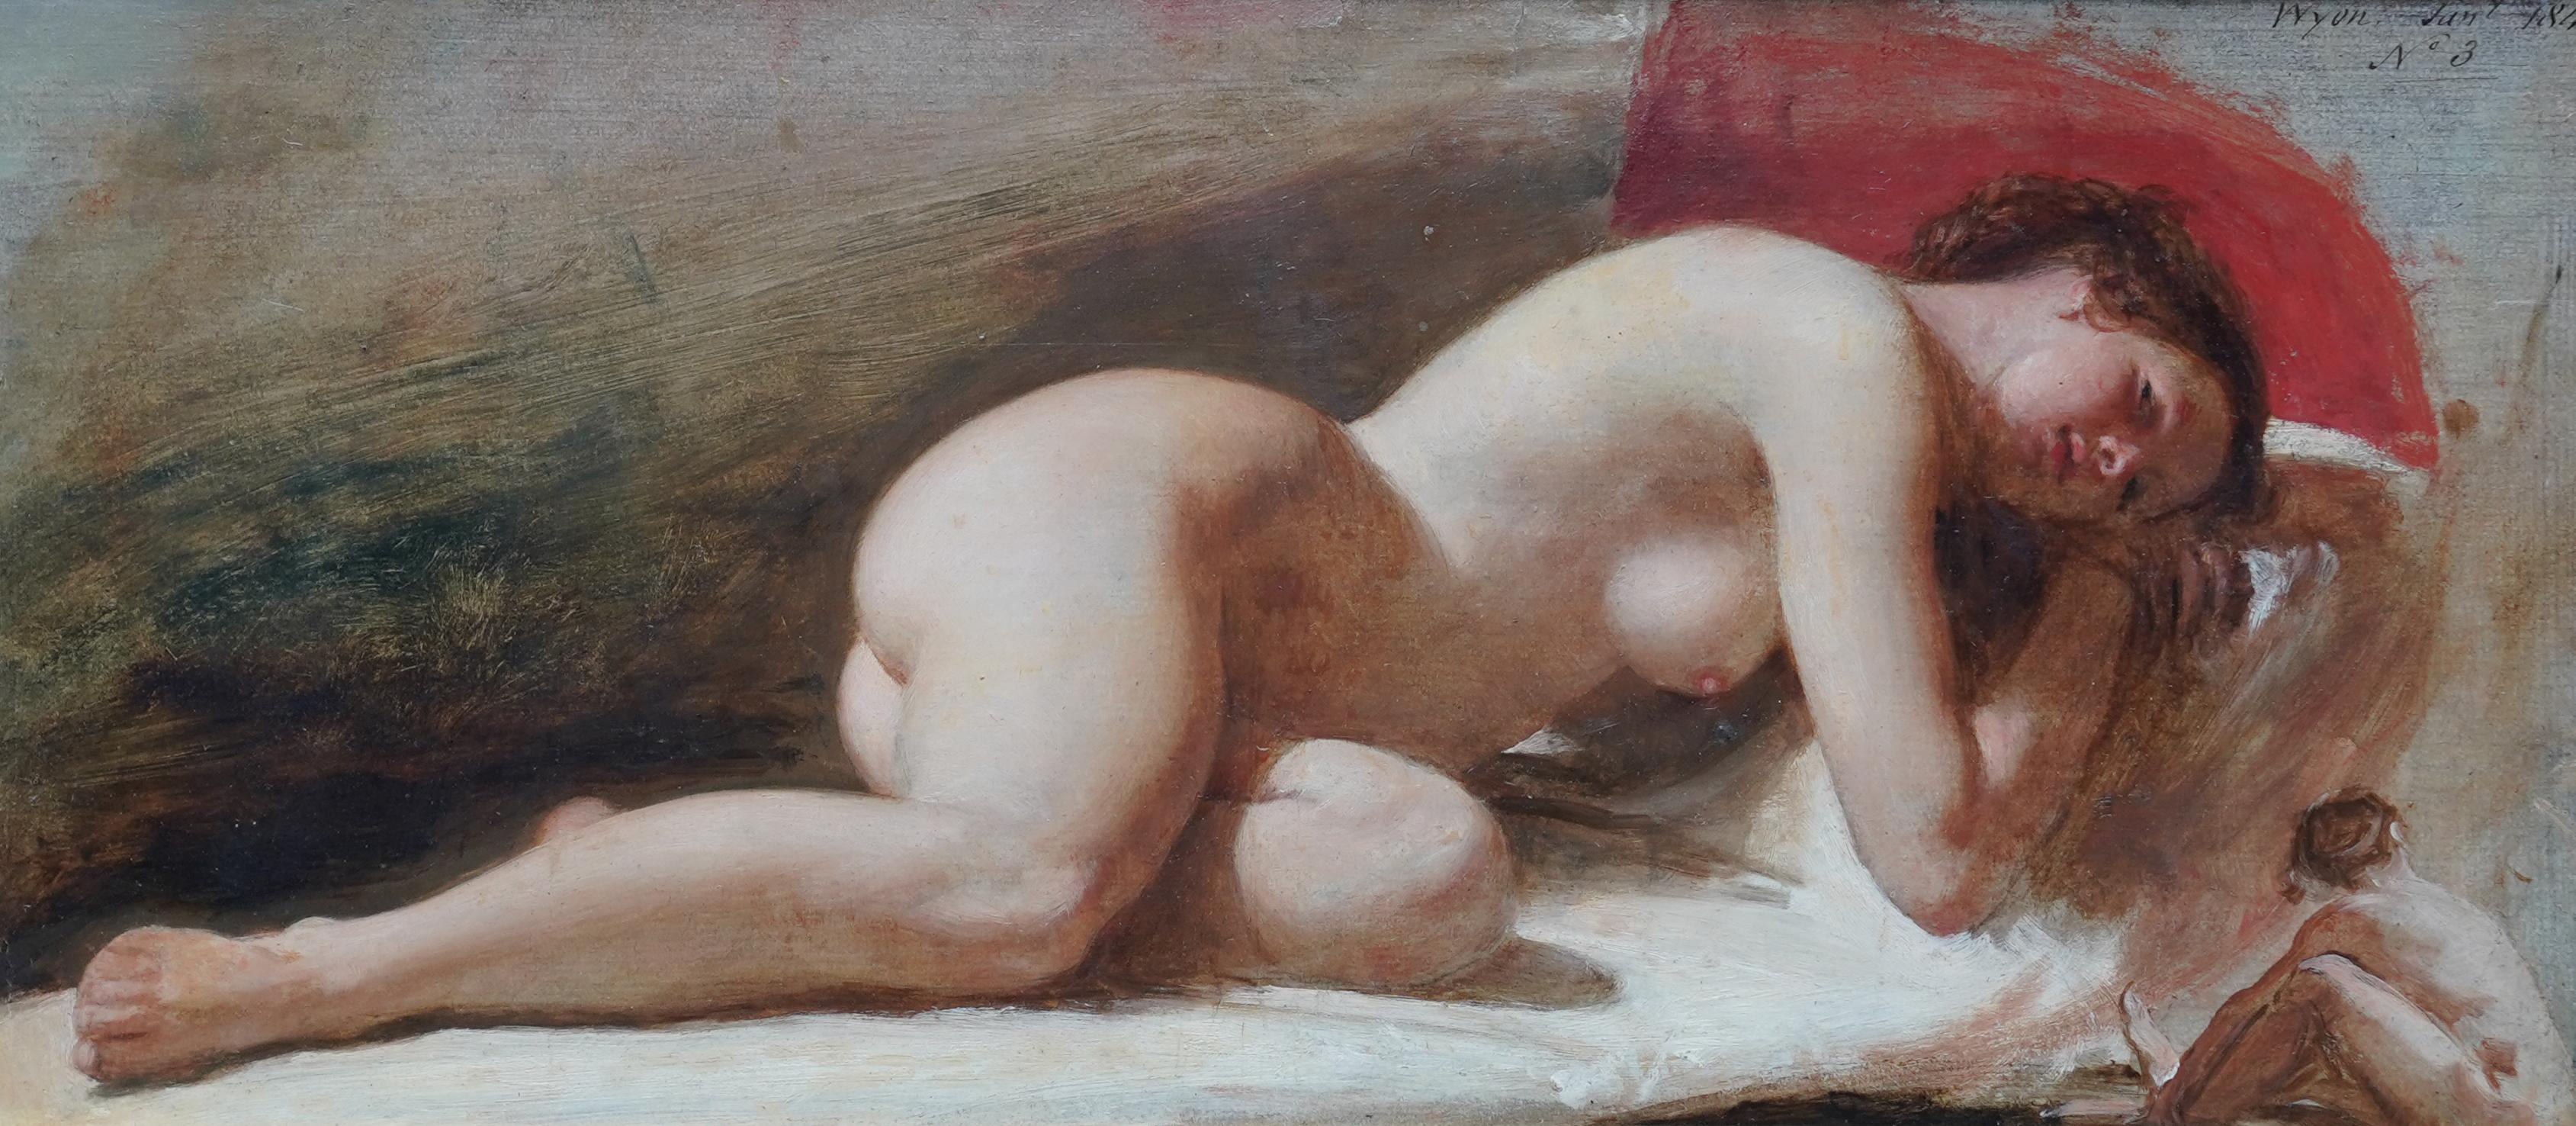 Reclining Nude Female Portrait - British 19th century Victorian art oil painting For Sale 7